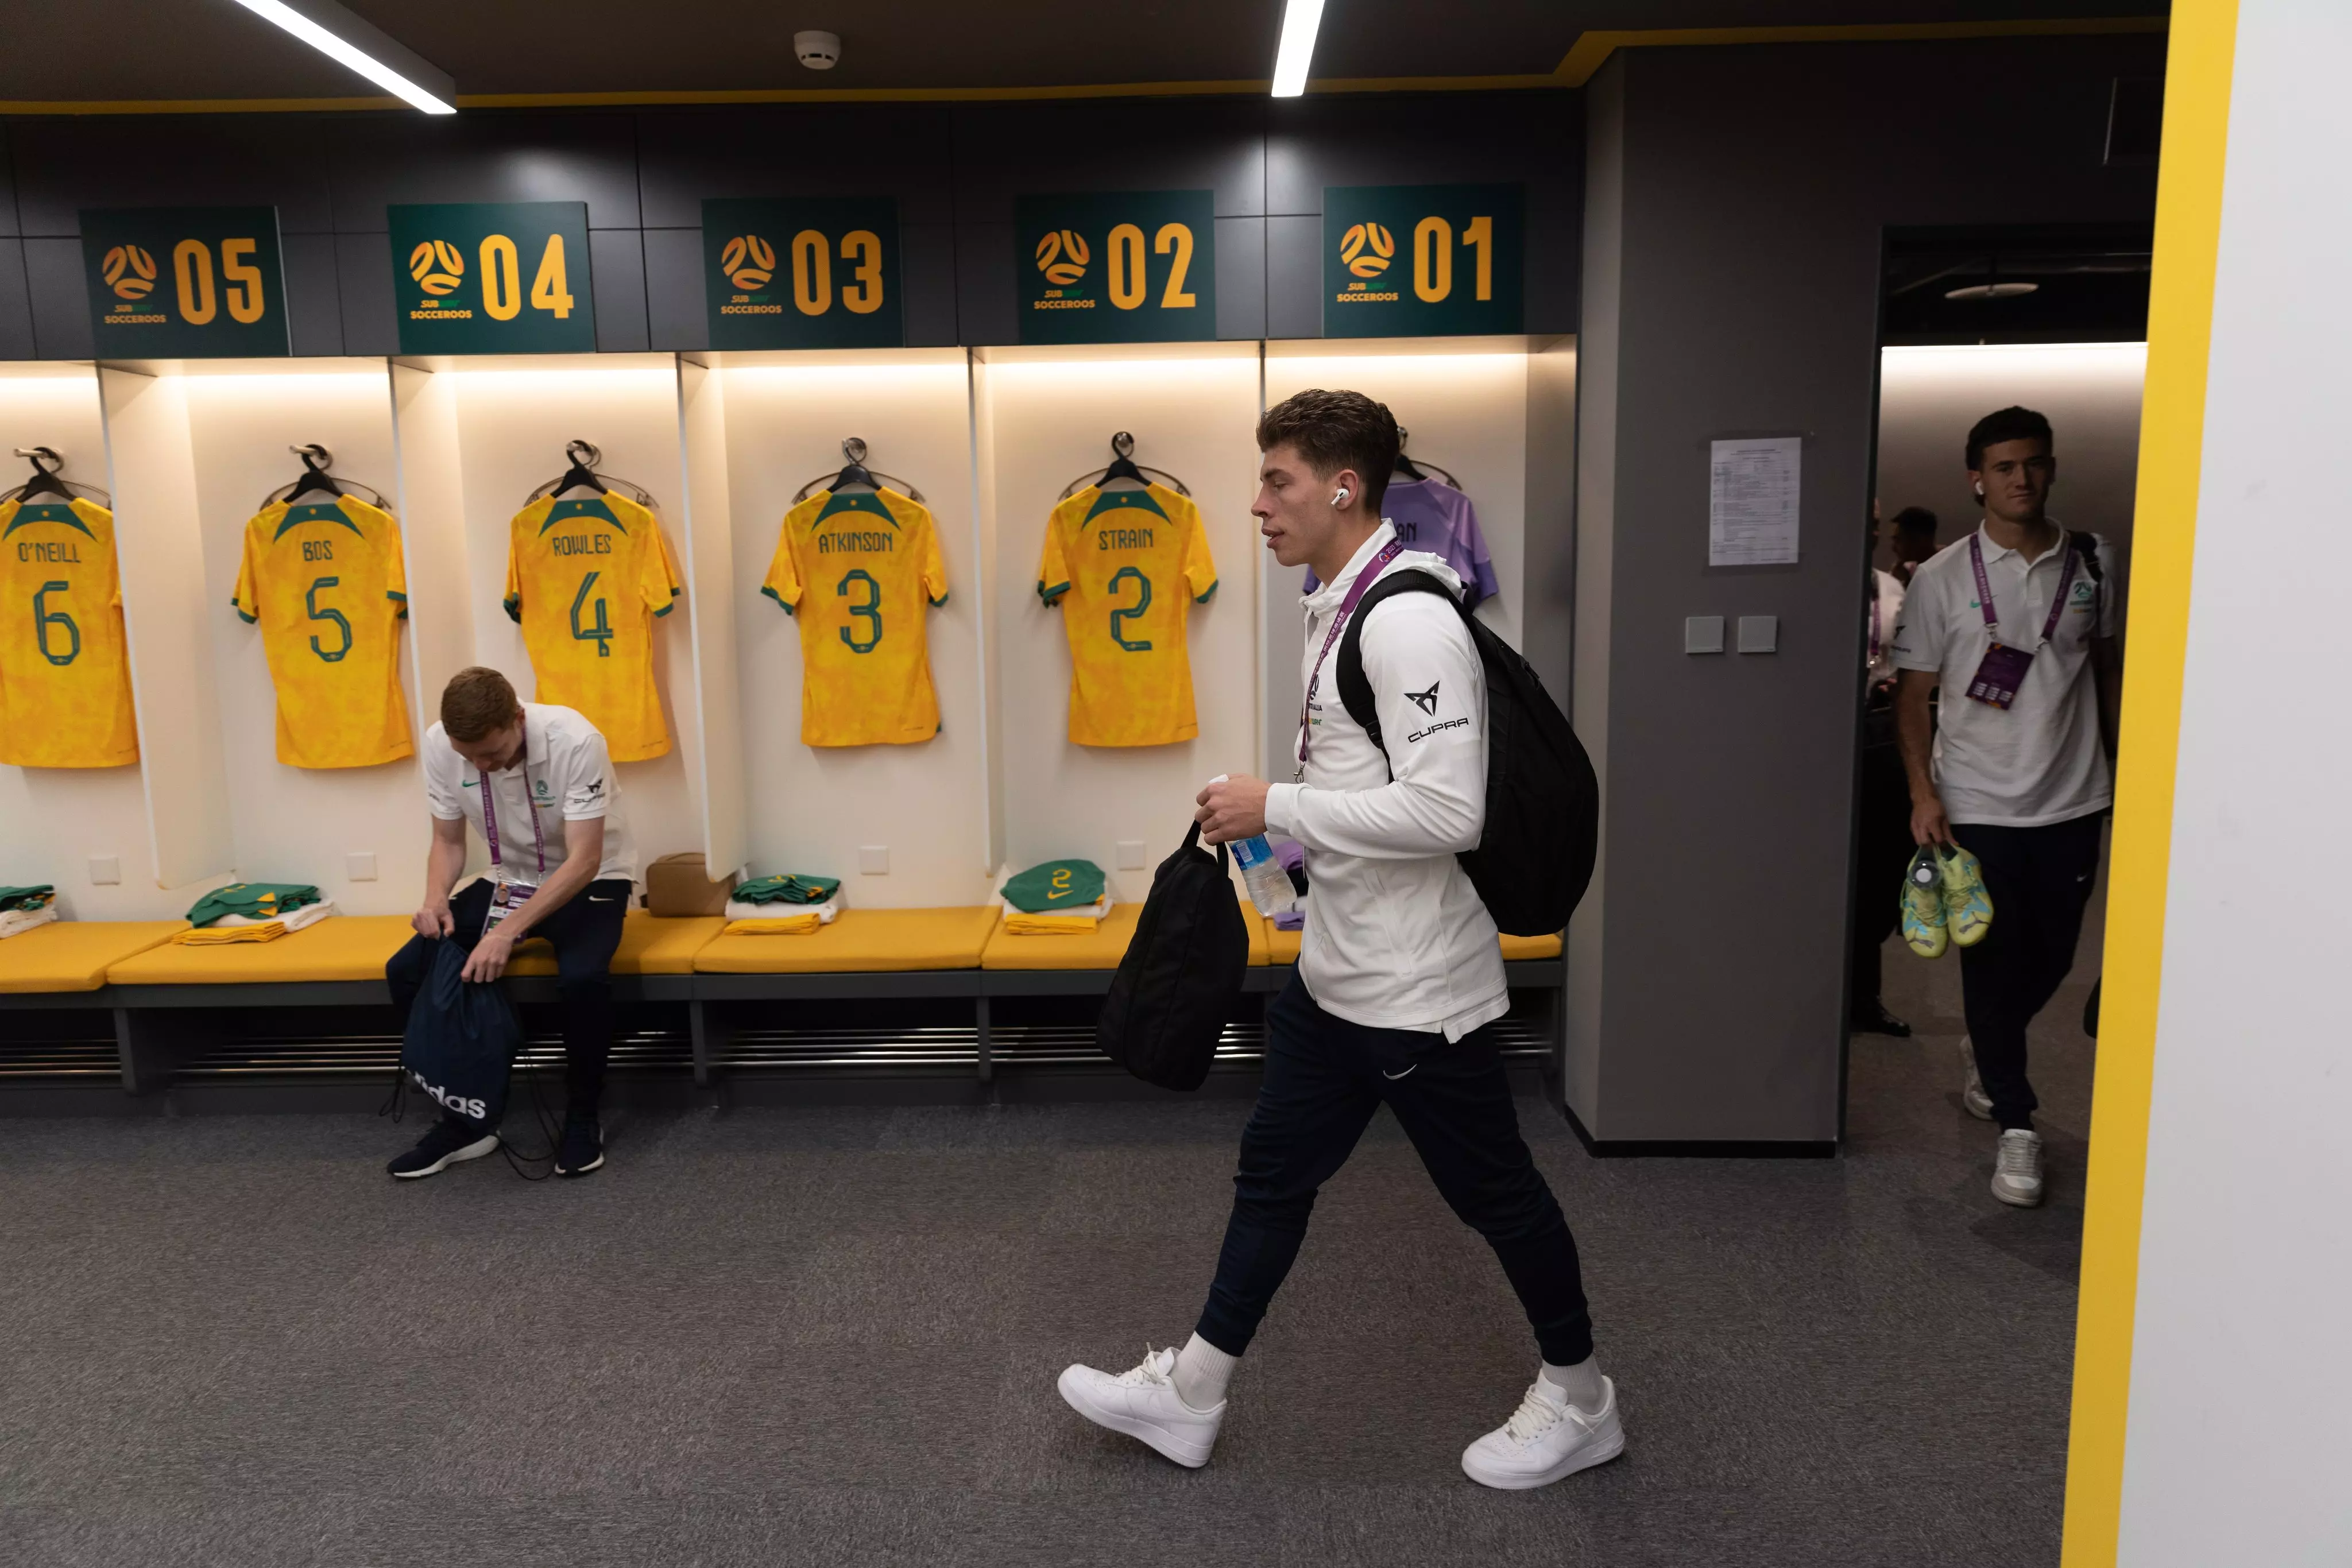 Jordan Bos ahead of his first start for Australia (Friendly against Argentina on 15th June 2023)